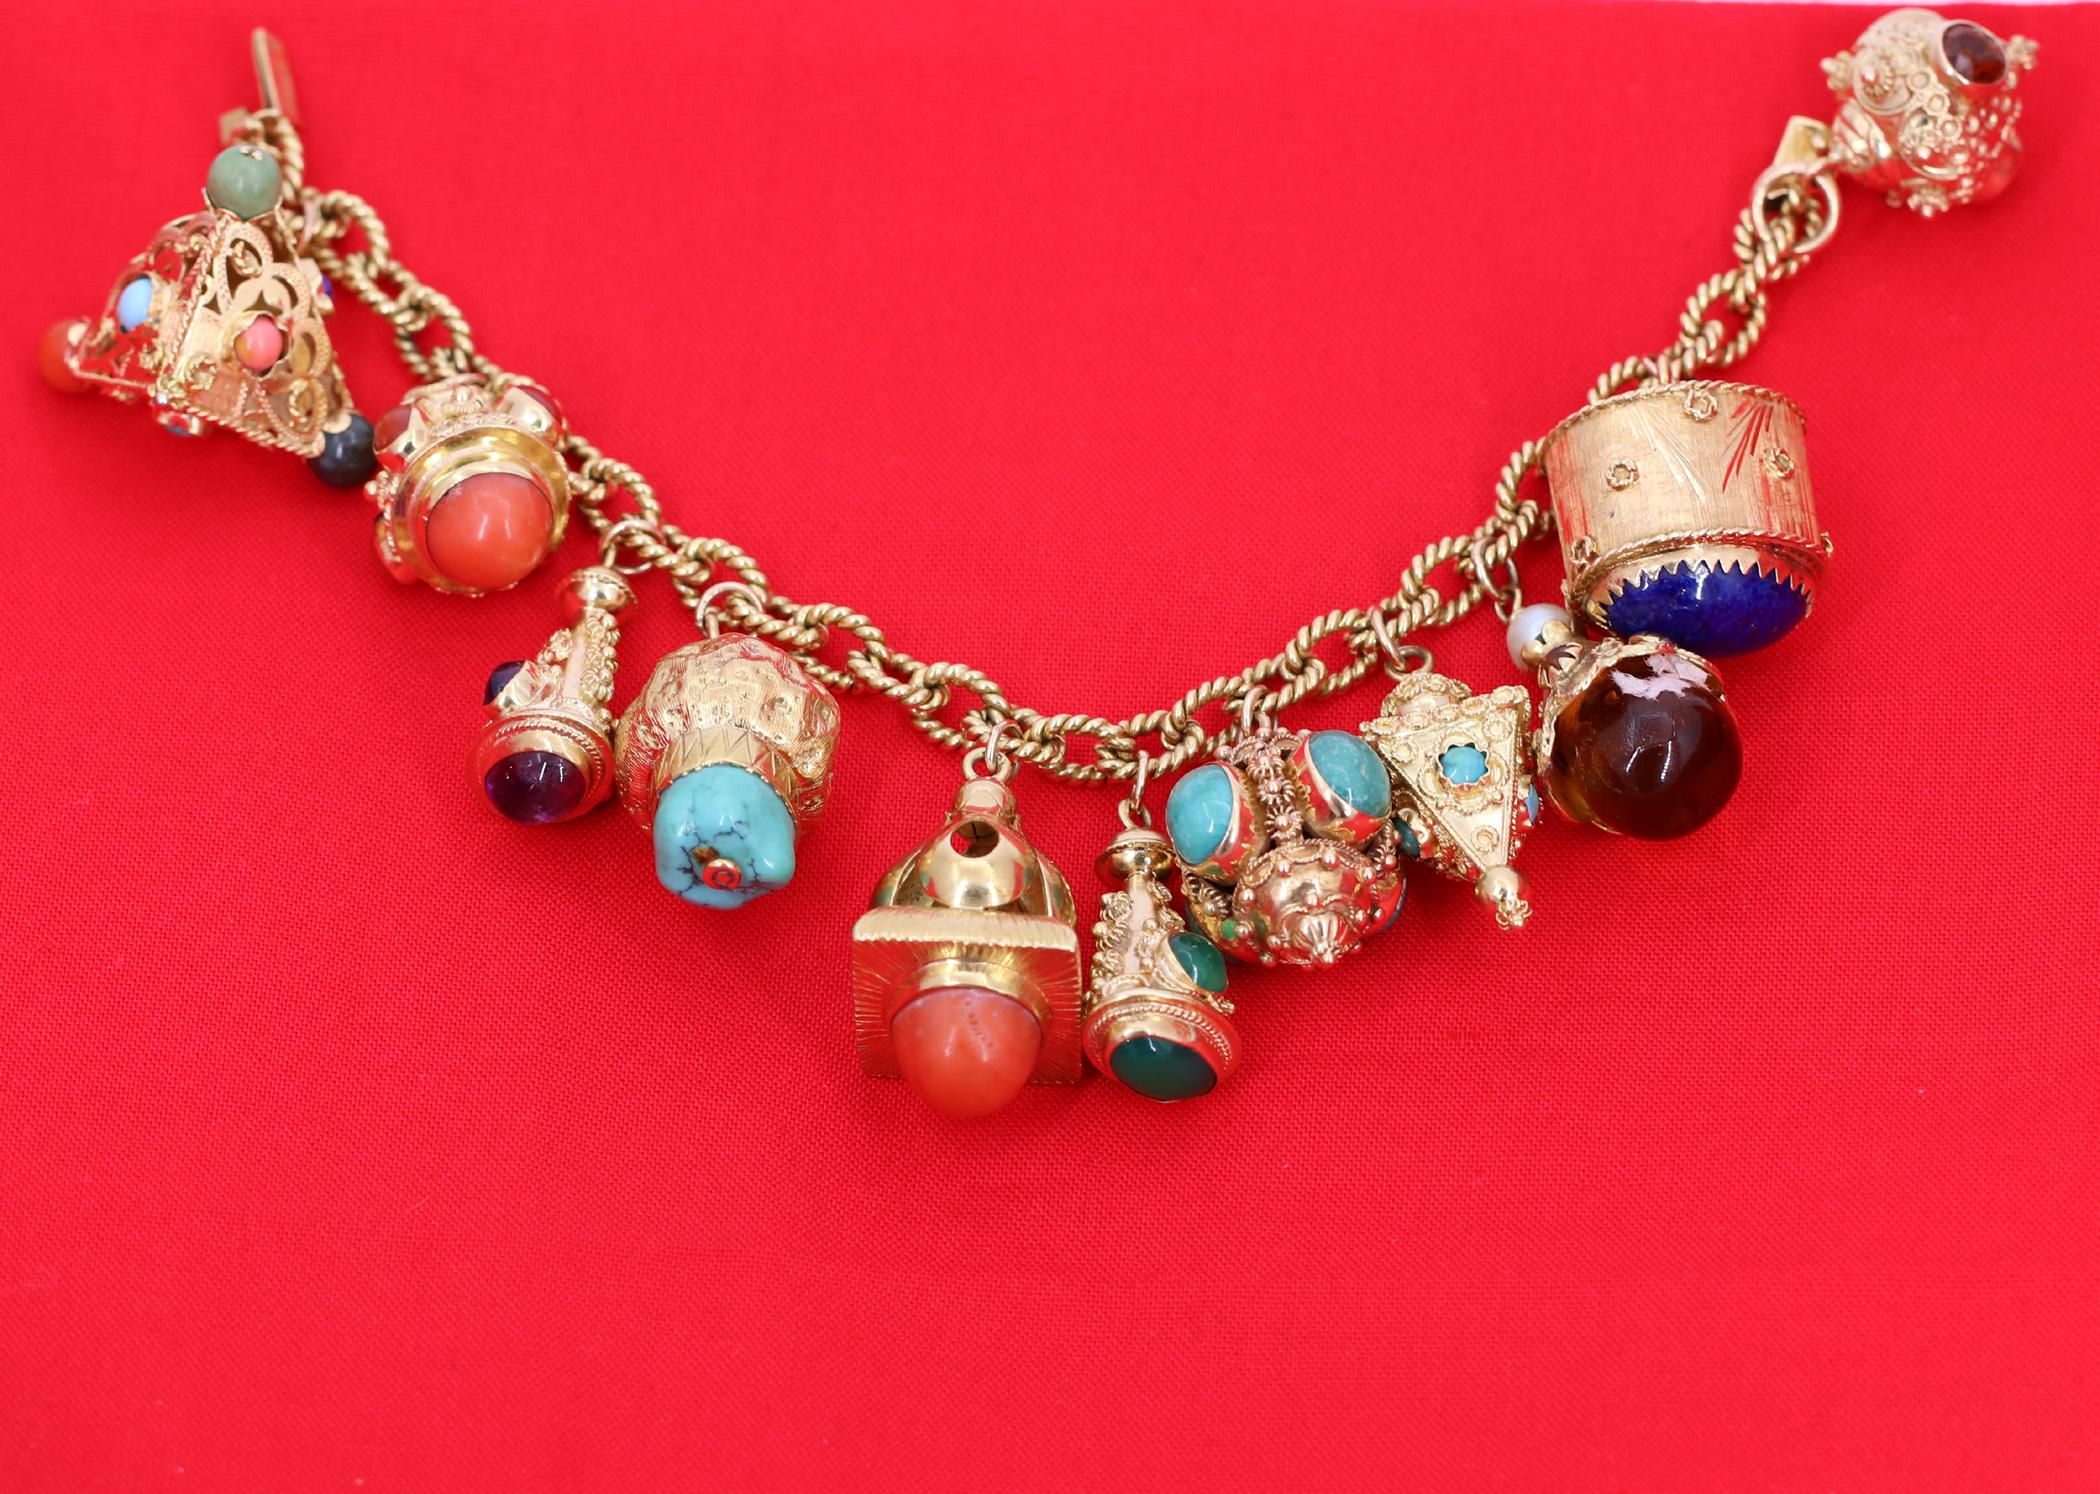 A ladies 18K yellow gold, twisted rope design bracelet signed Weingrill, with eleven Etruscan revival charms. The bracelet gets a rainbow of color from the combination of semiprecious gemstones and glass. Measuring 7 1/2 inches long, it can fit a